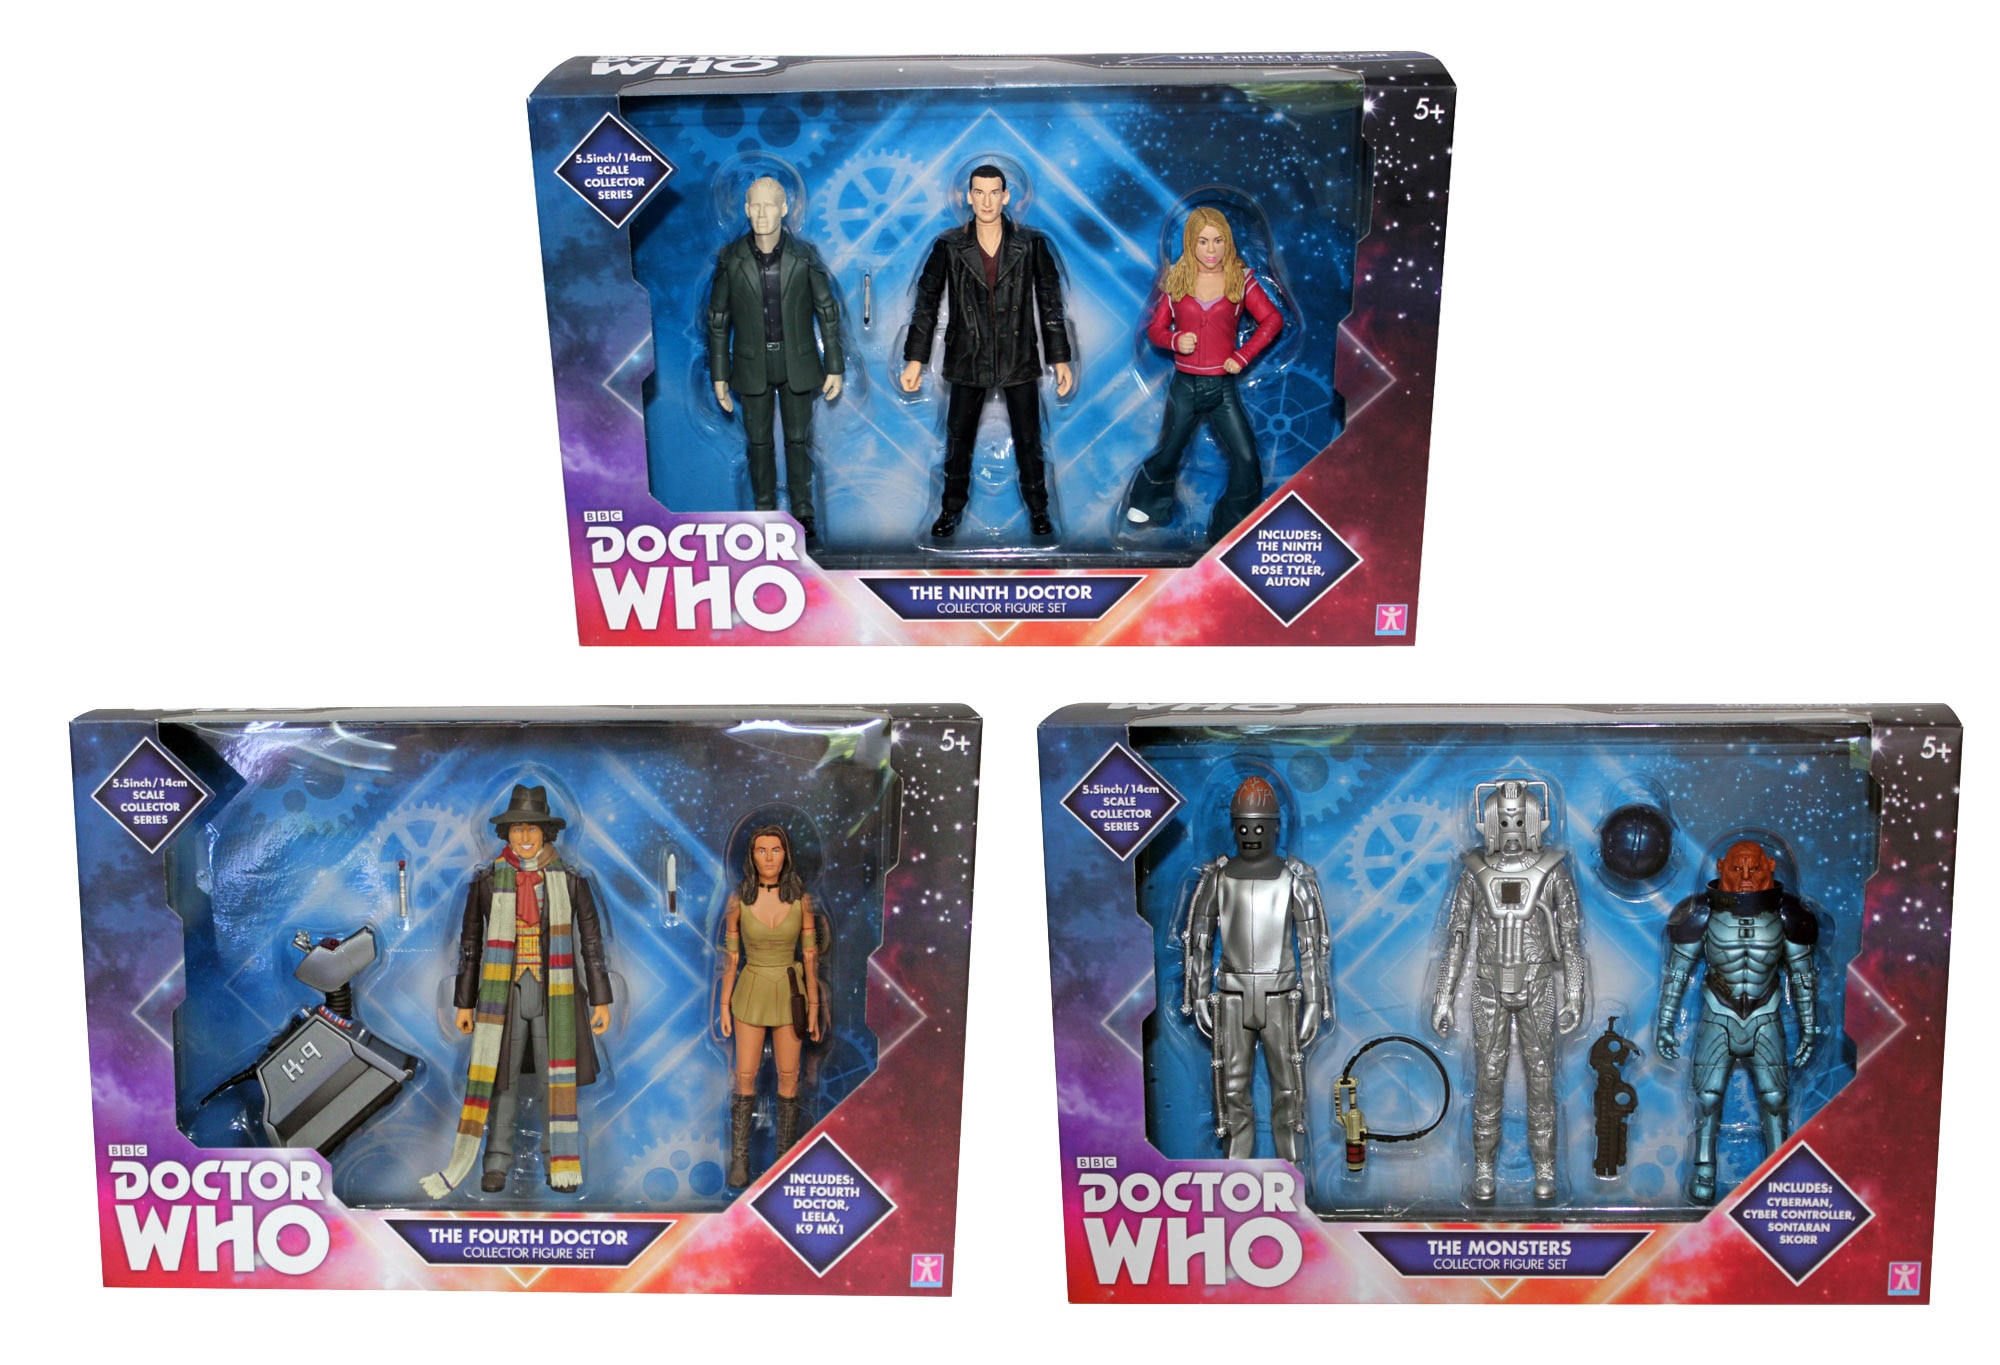 Images of Doctor Who figurines in boxes